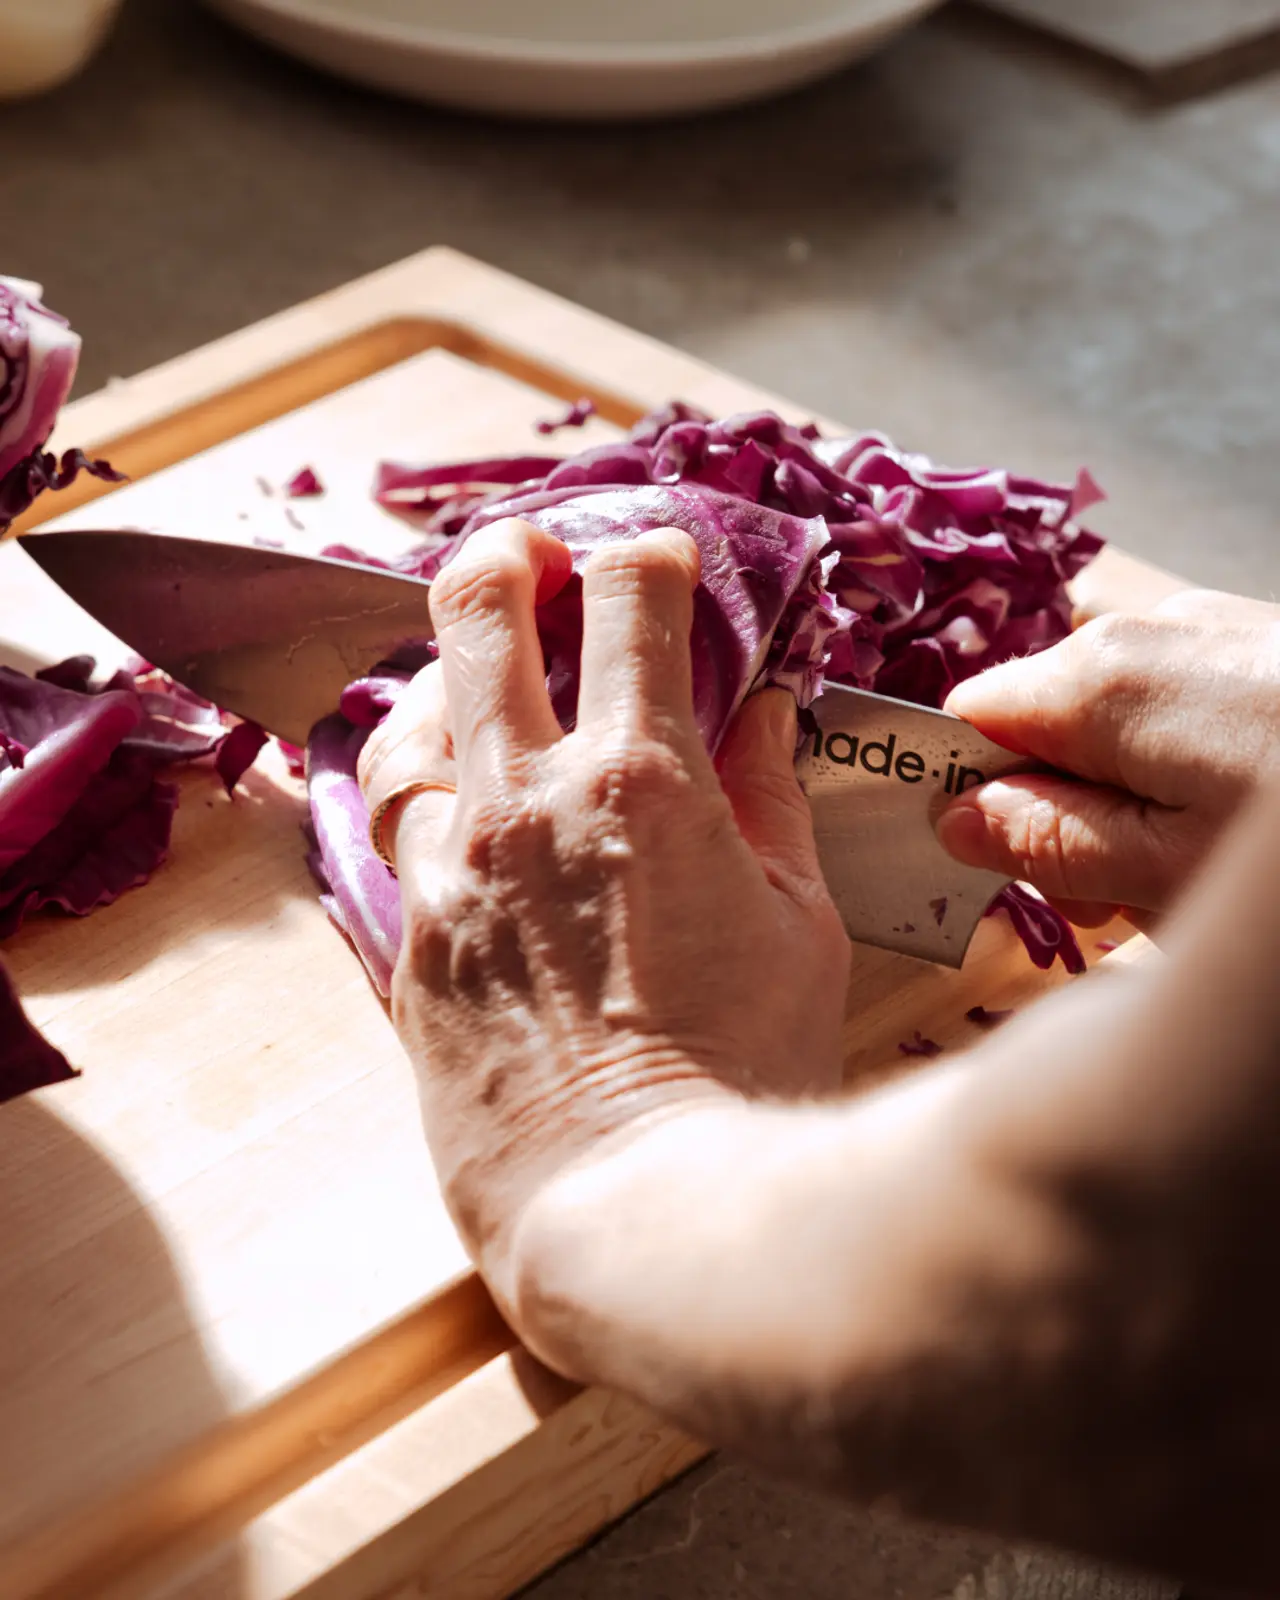 Hands are chopping red cabbage on a wooden cutting board.